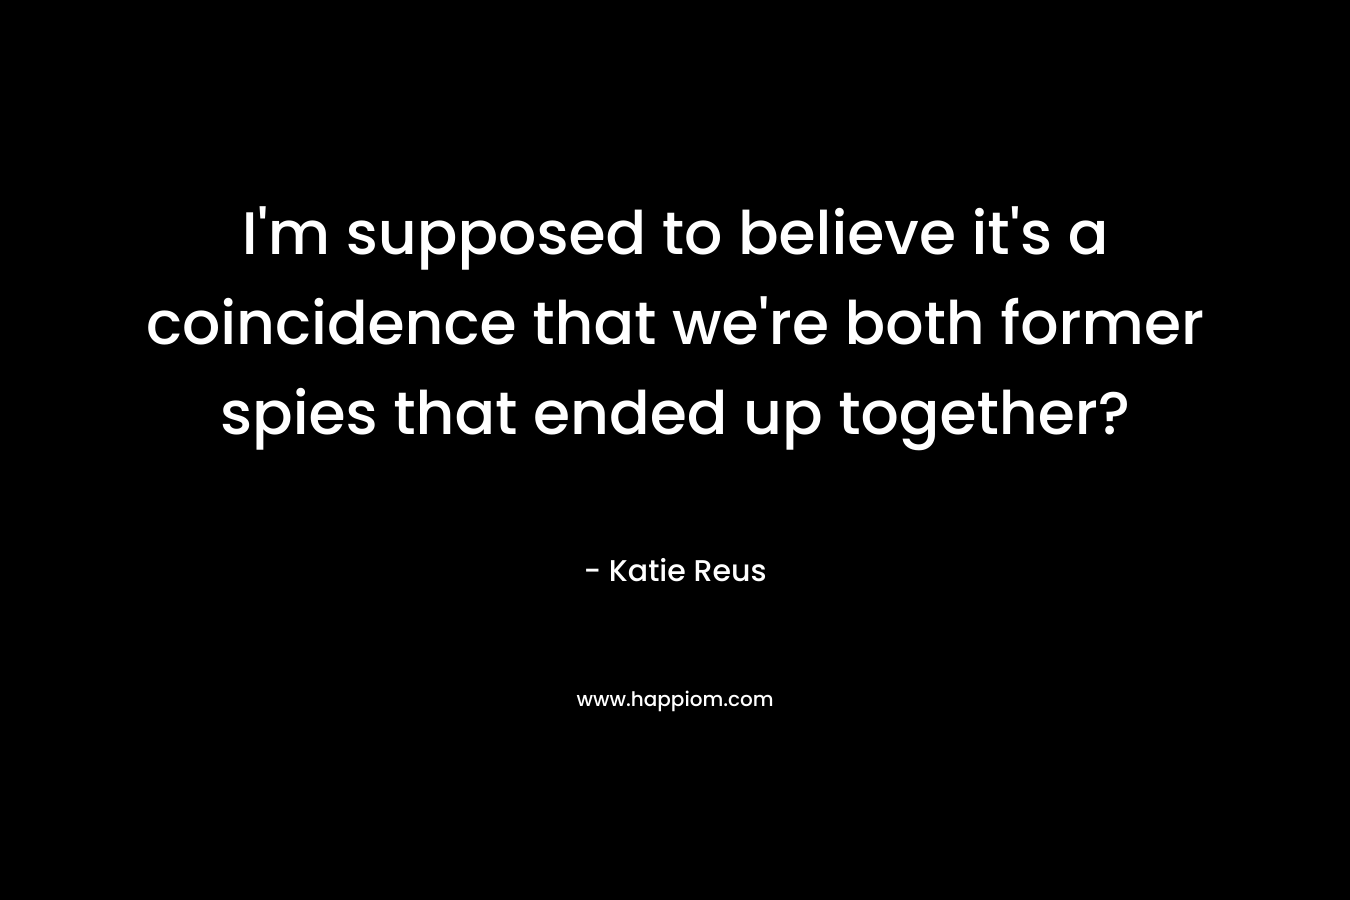 I’m supposed to believe it’s a coincidence that we’re both former spies that ended up together? – Katie Reus